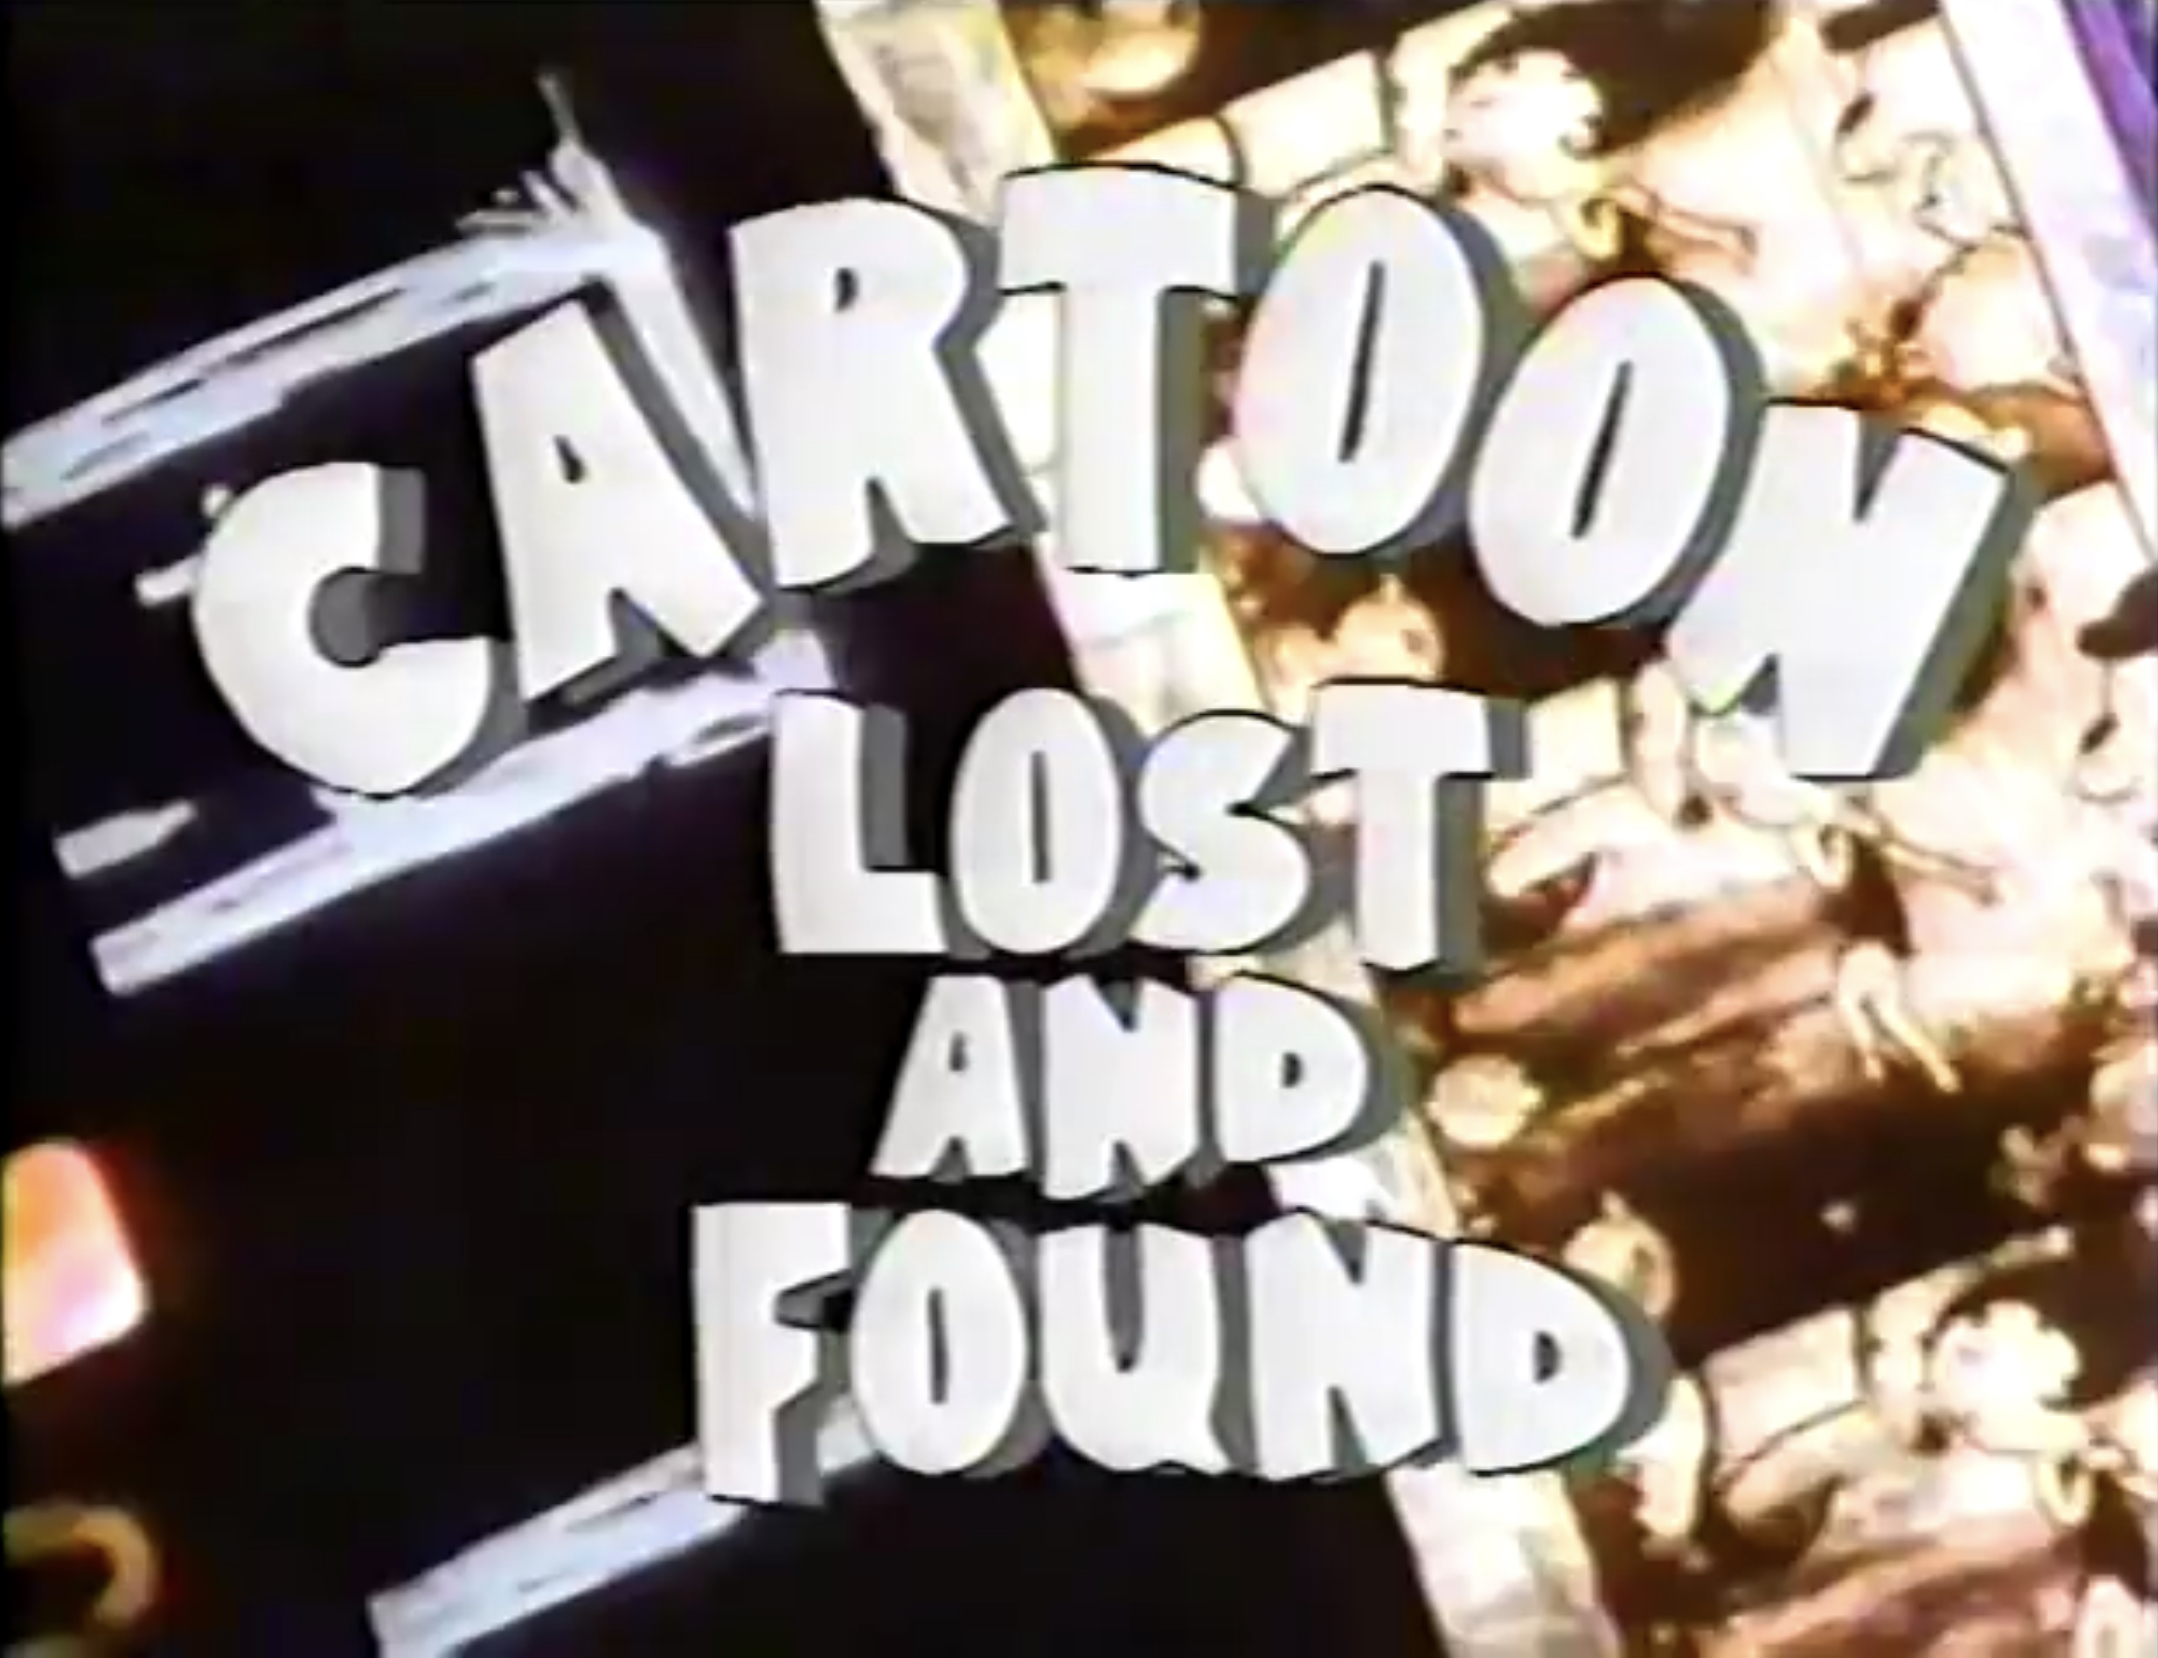 Cartoon lost and found title.jpeg